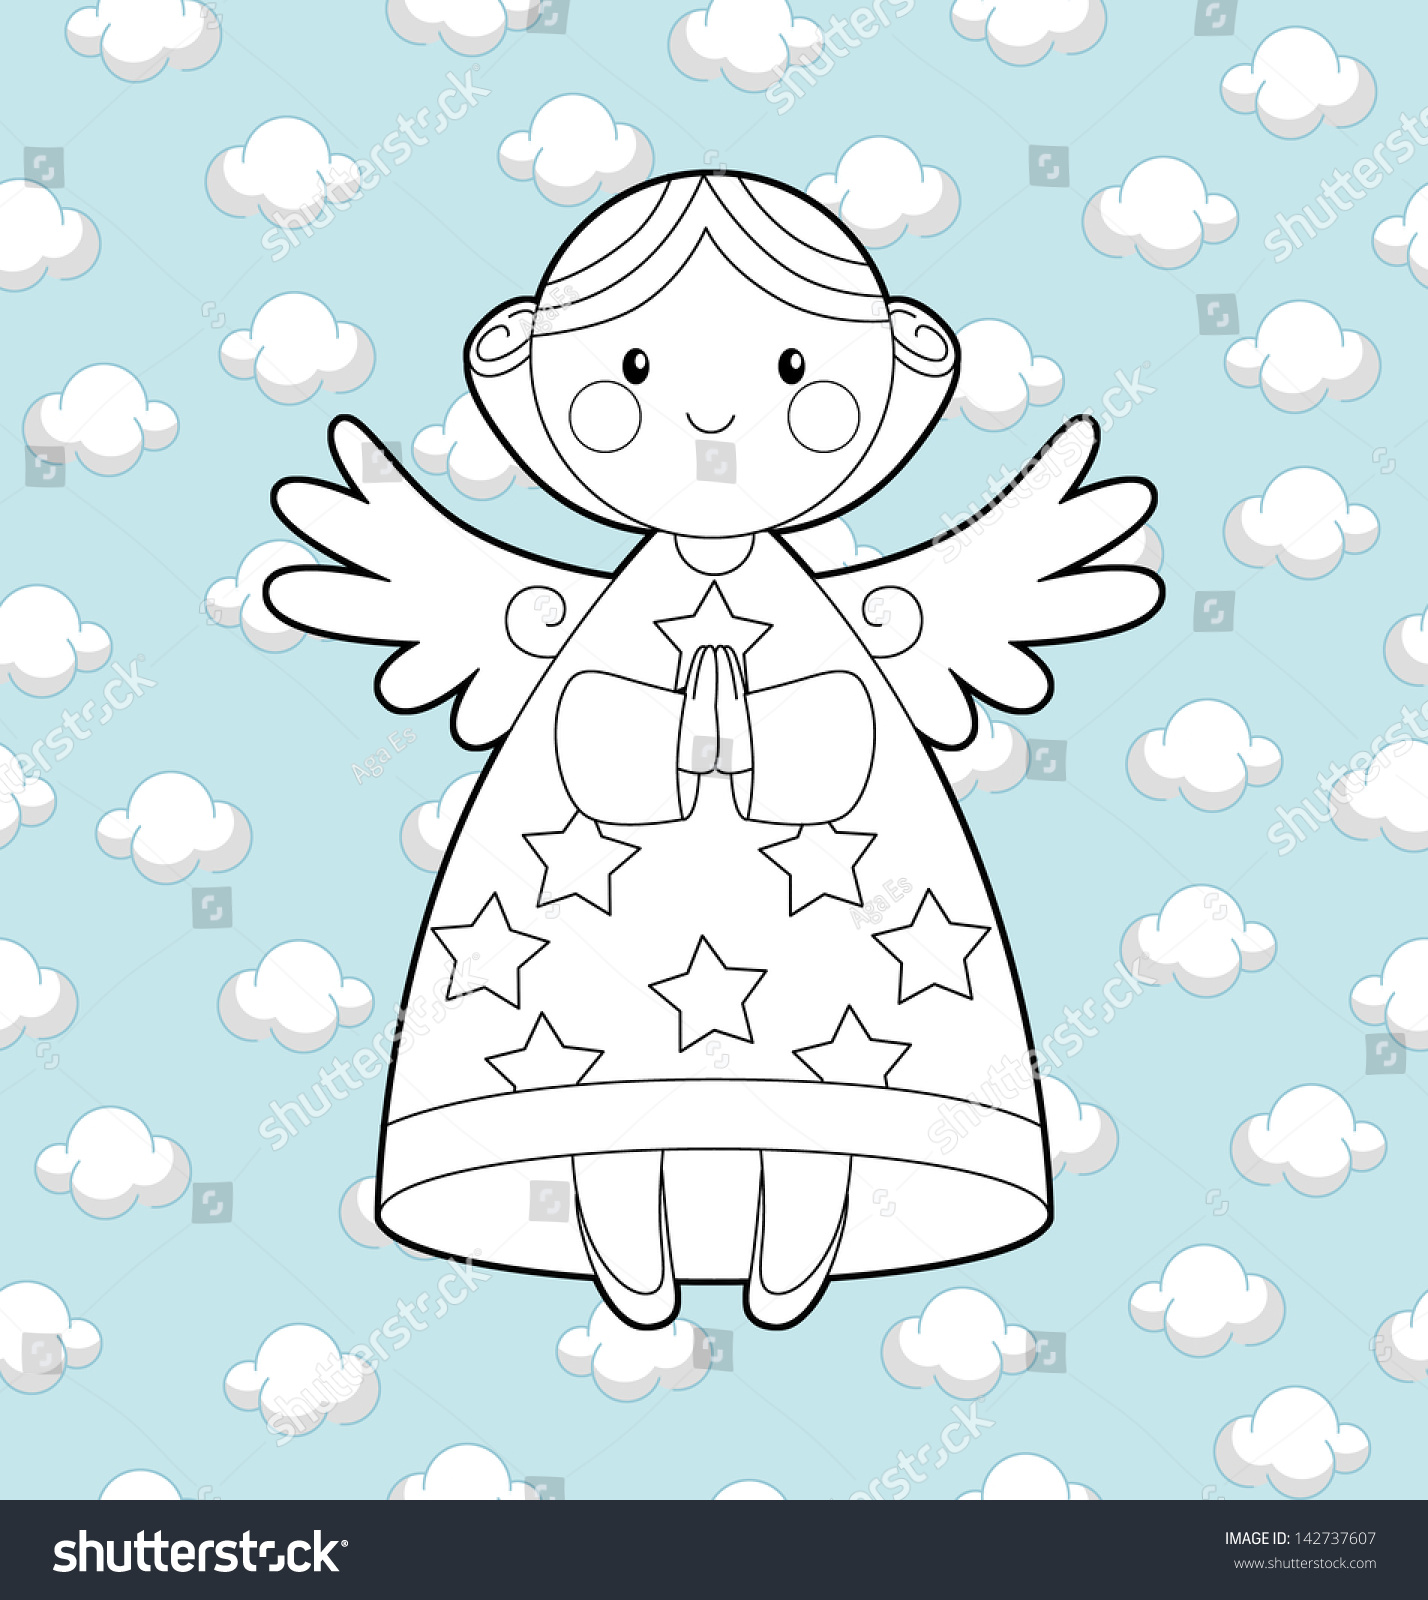 Coloring Page Christmas Angel Illustration Stock Illustration ...